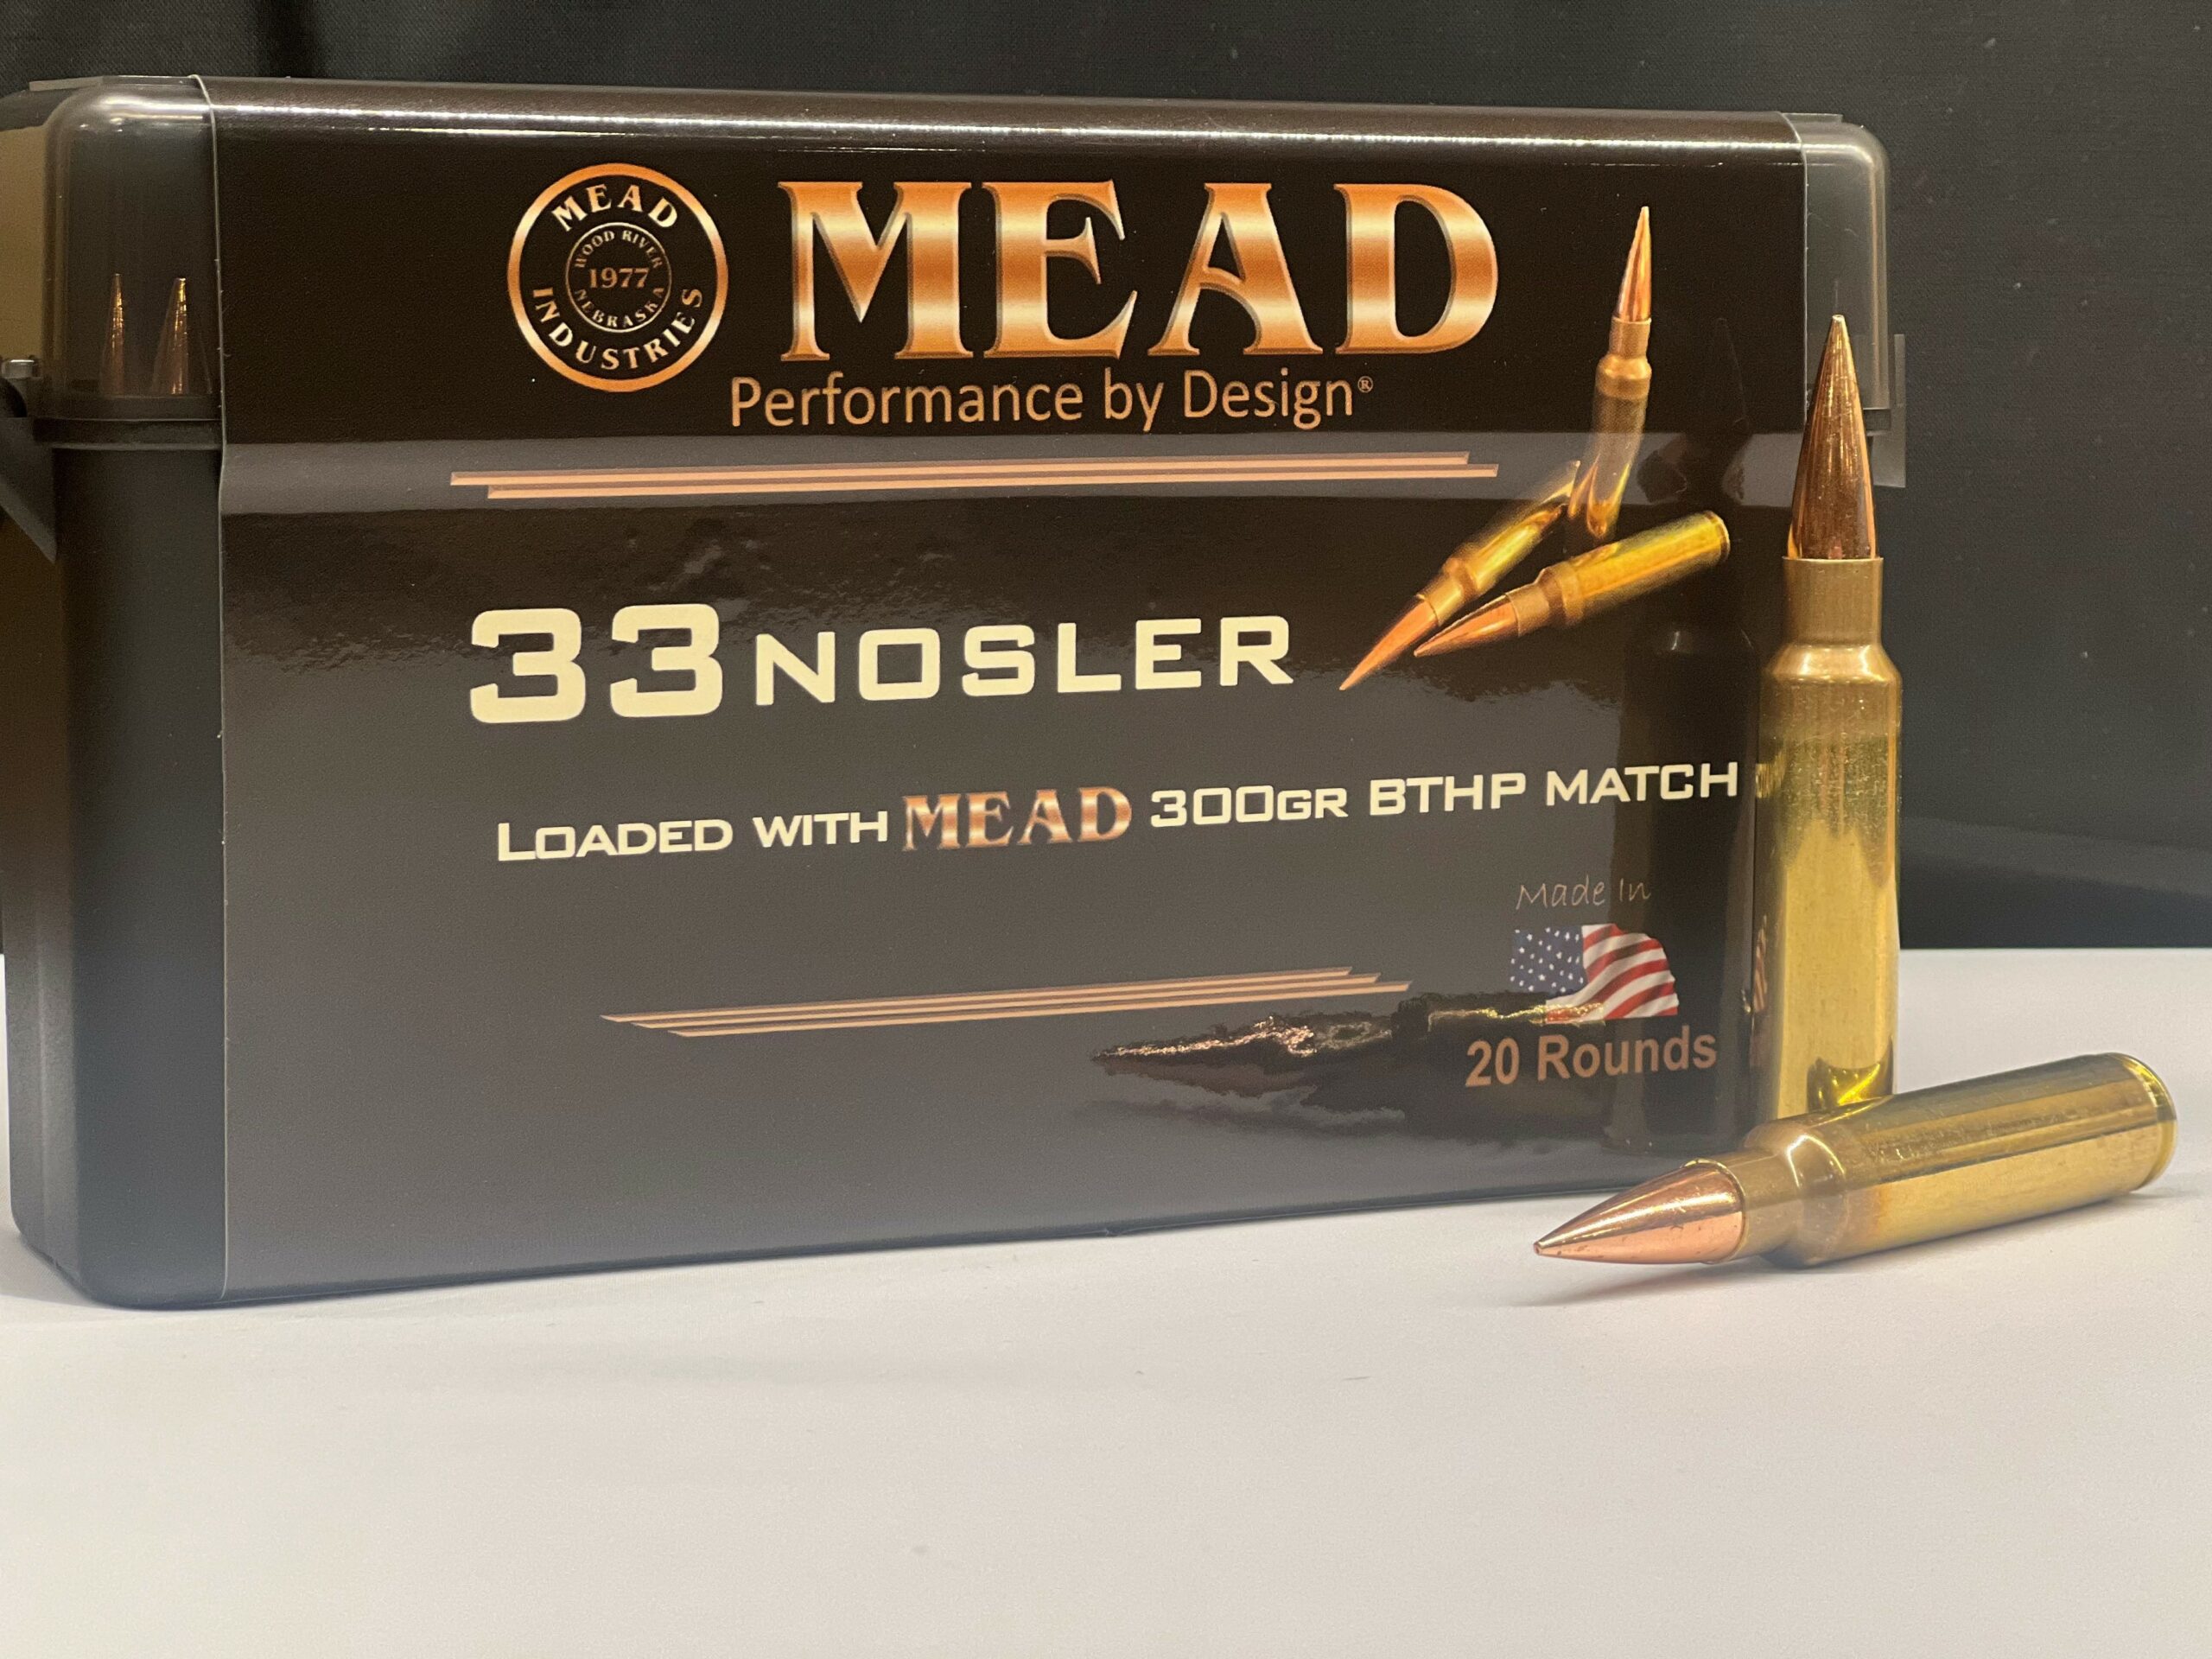 Made In The Usa Mead 33 Nosler 300gr Bthp 20 Rounds New Brass Comes In A Free Ammo Box 